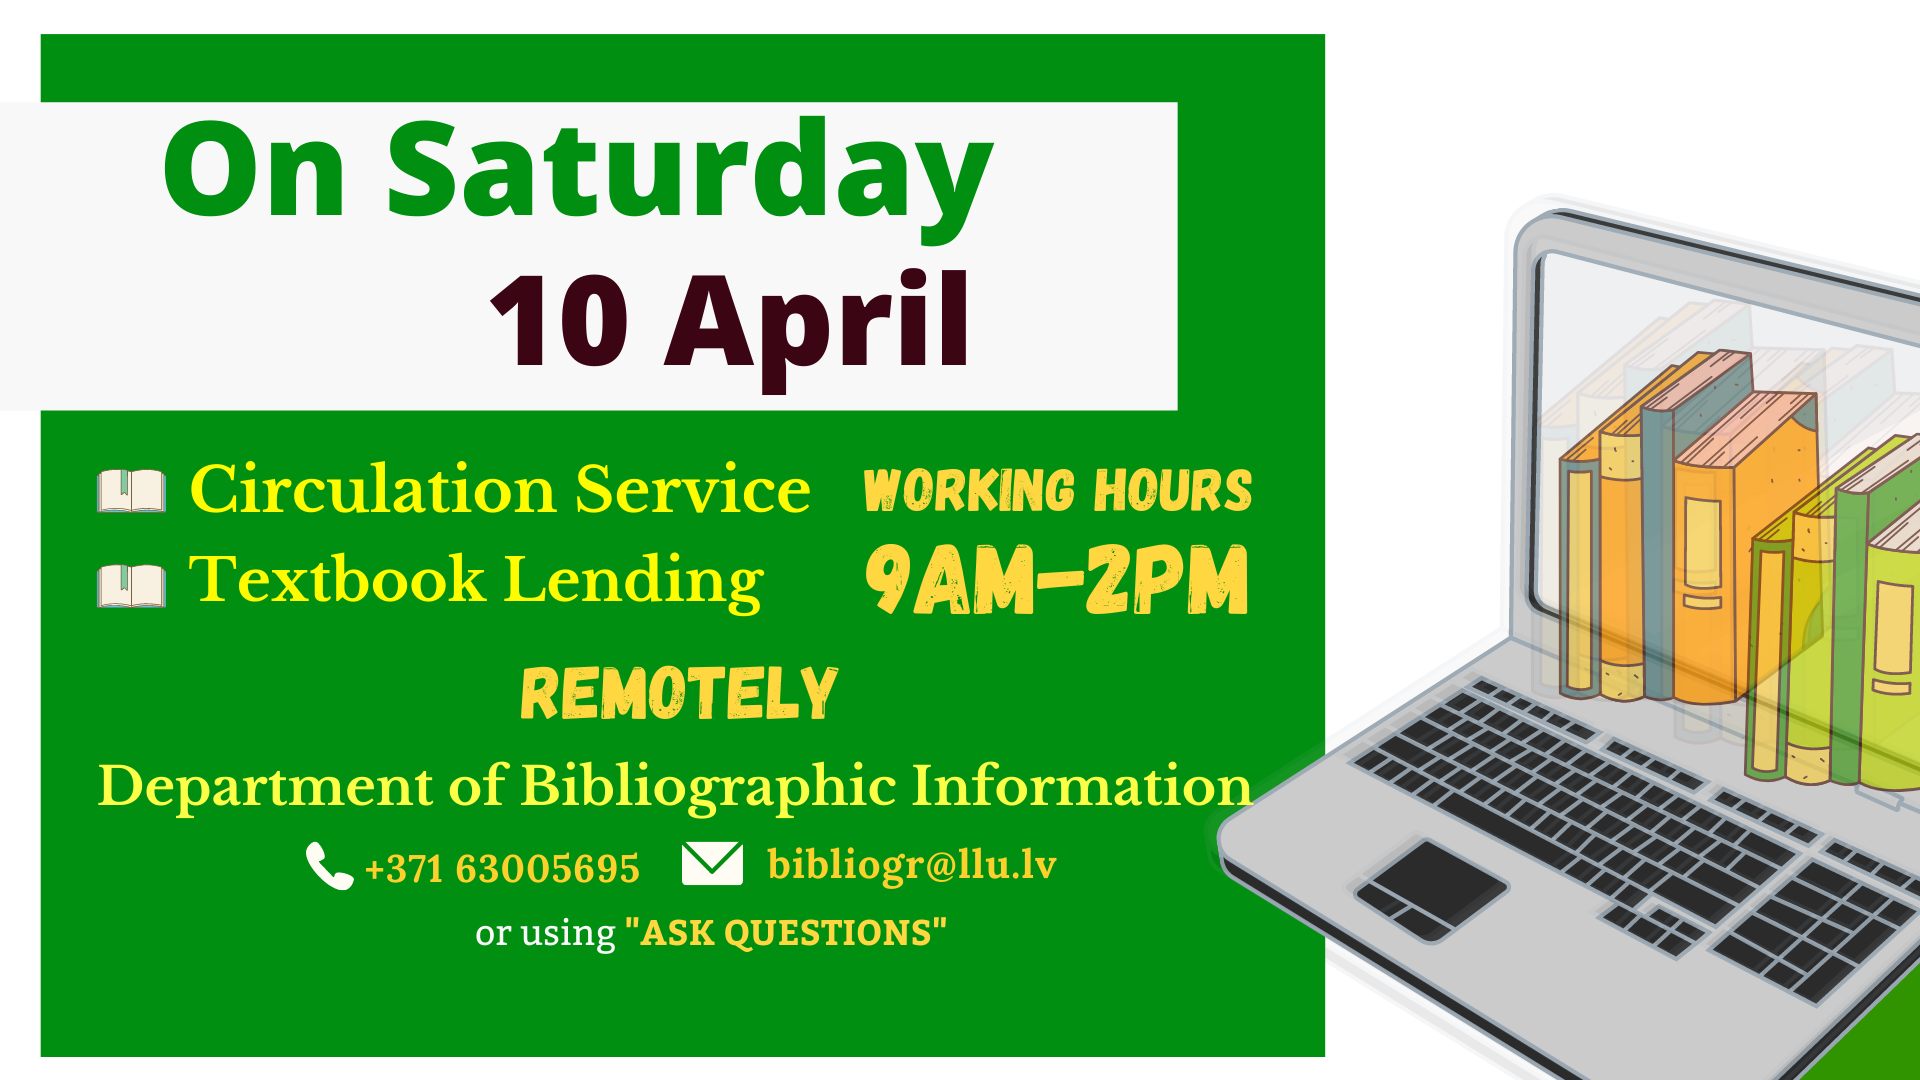 On Saturday 10 April  Fundamental Library of the Latvia University of Life Sciences and Technologies  is open from 9am until 2pm.